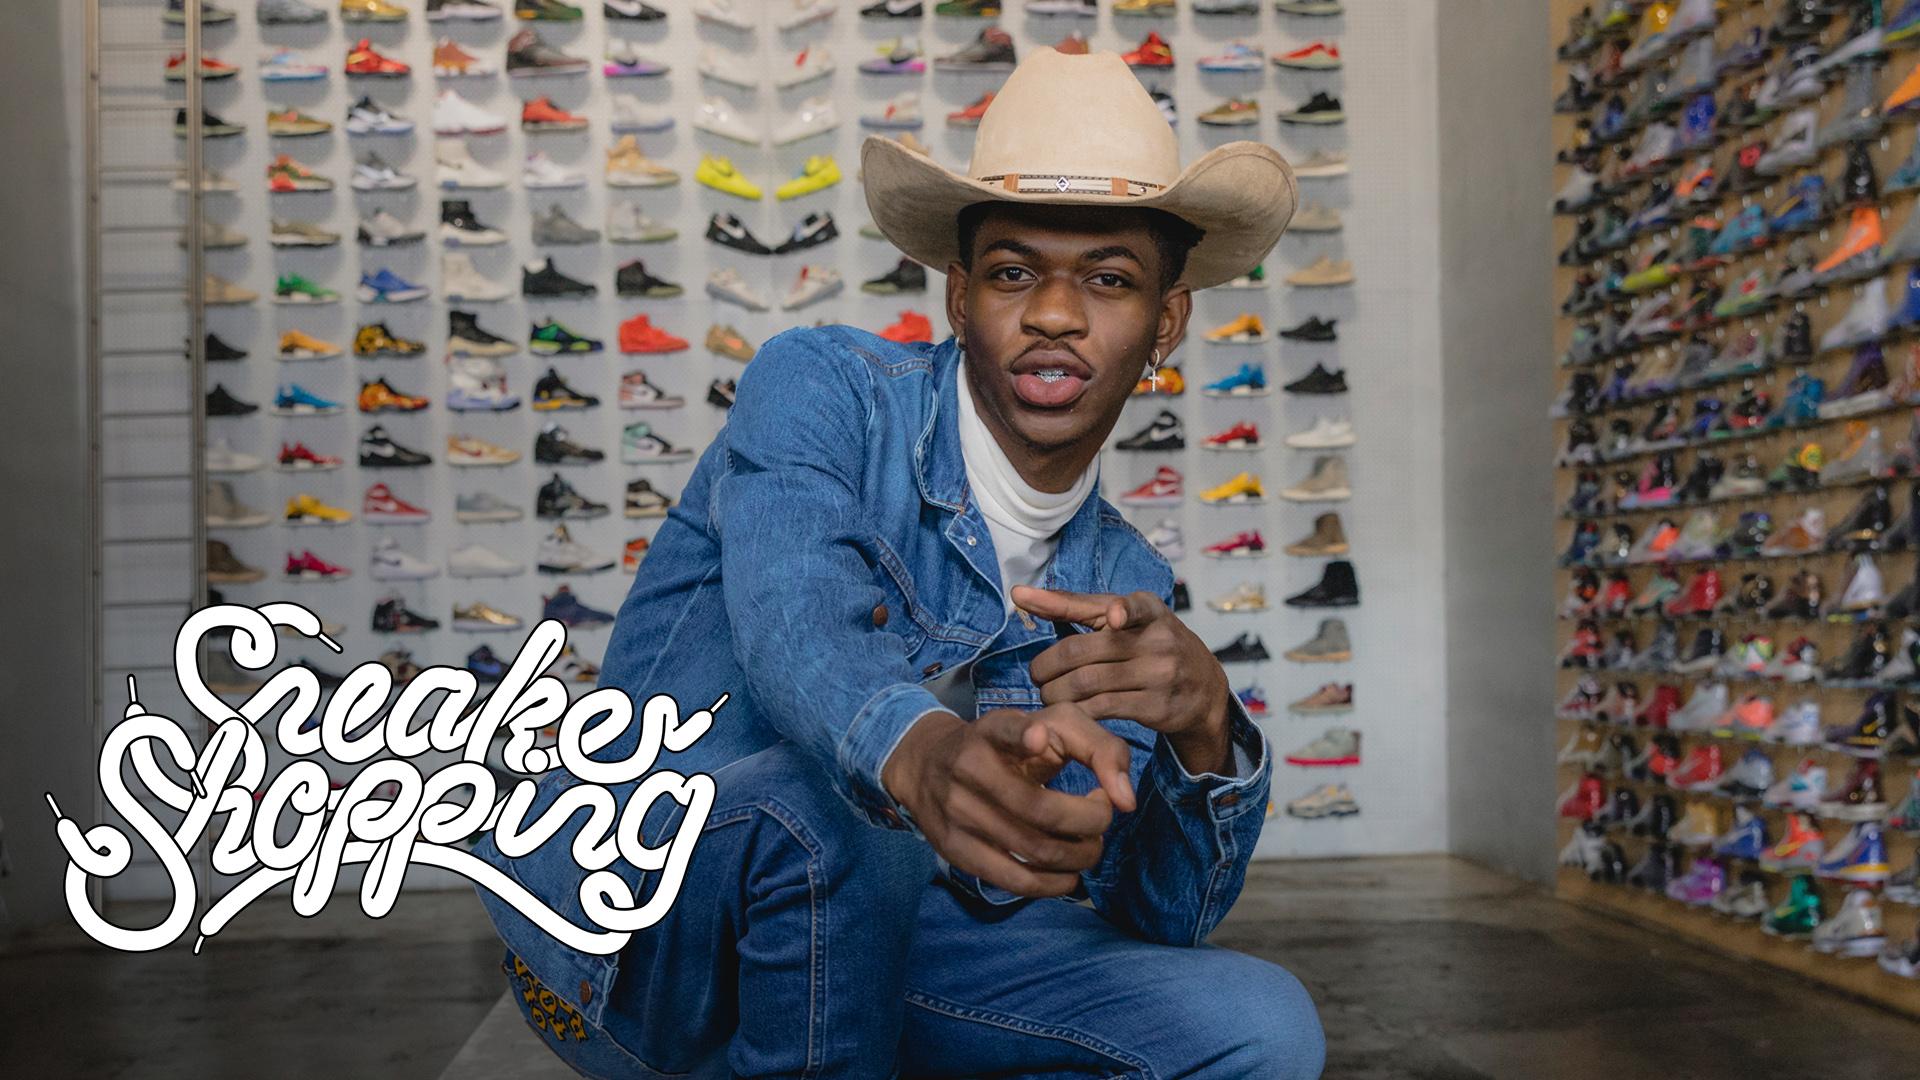 Old Town Road's' Lil Nas X Goes Sneaker Shopping With Complex